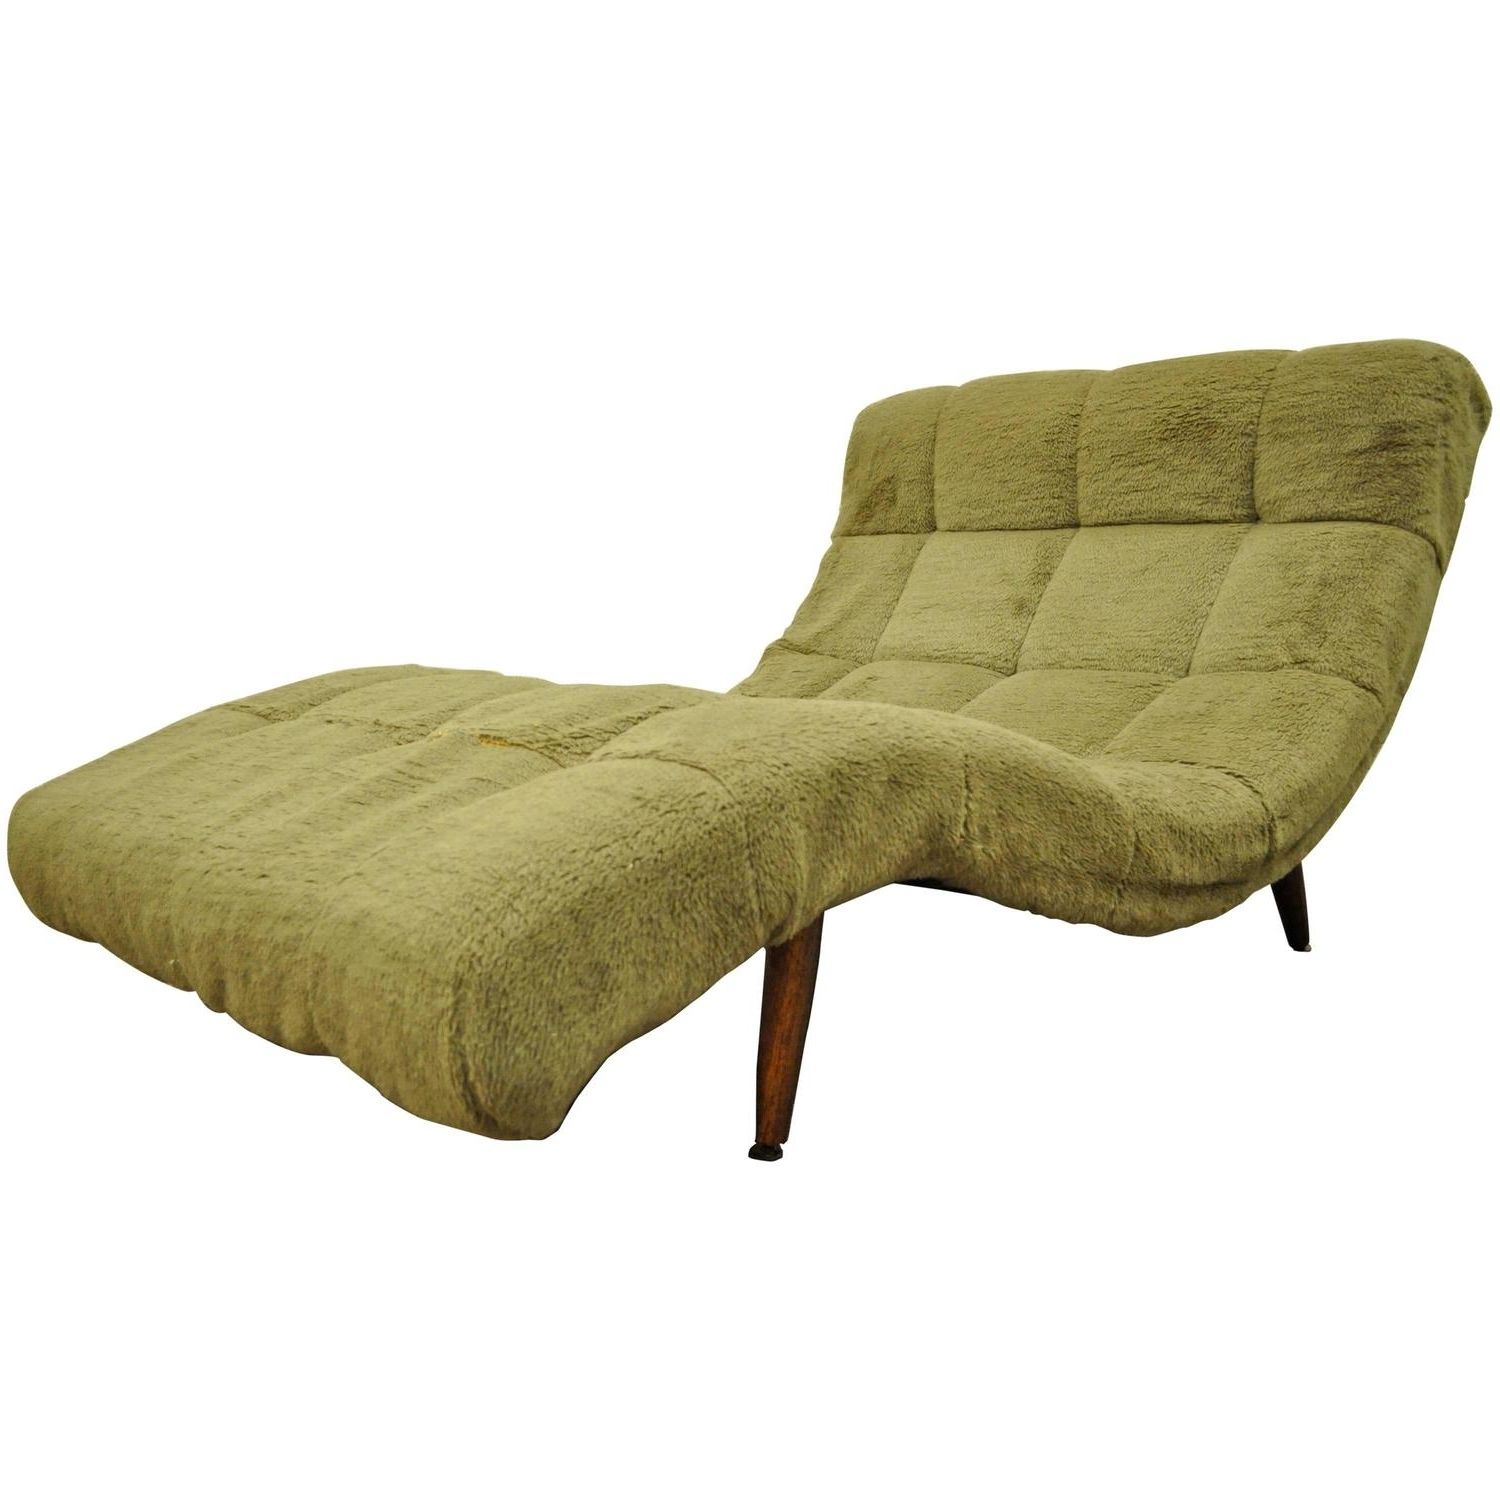 Latest Mid Century Modern Chaise Lounges Within Midcentury Modern Double Wide Wave Chaise Lounge In The Style Of (View 1 of 15)